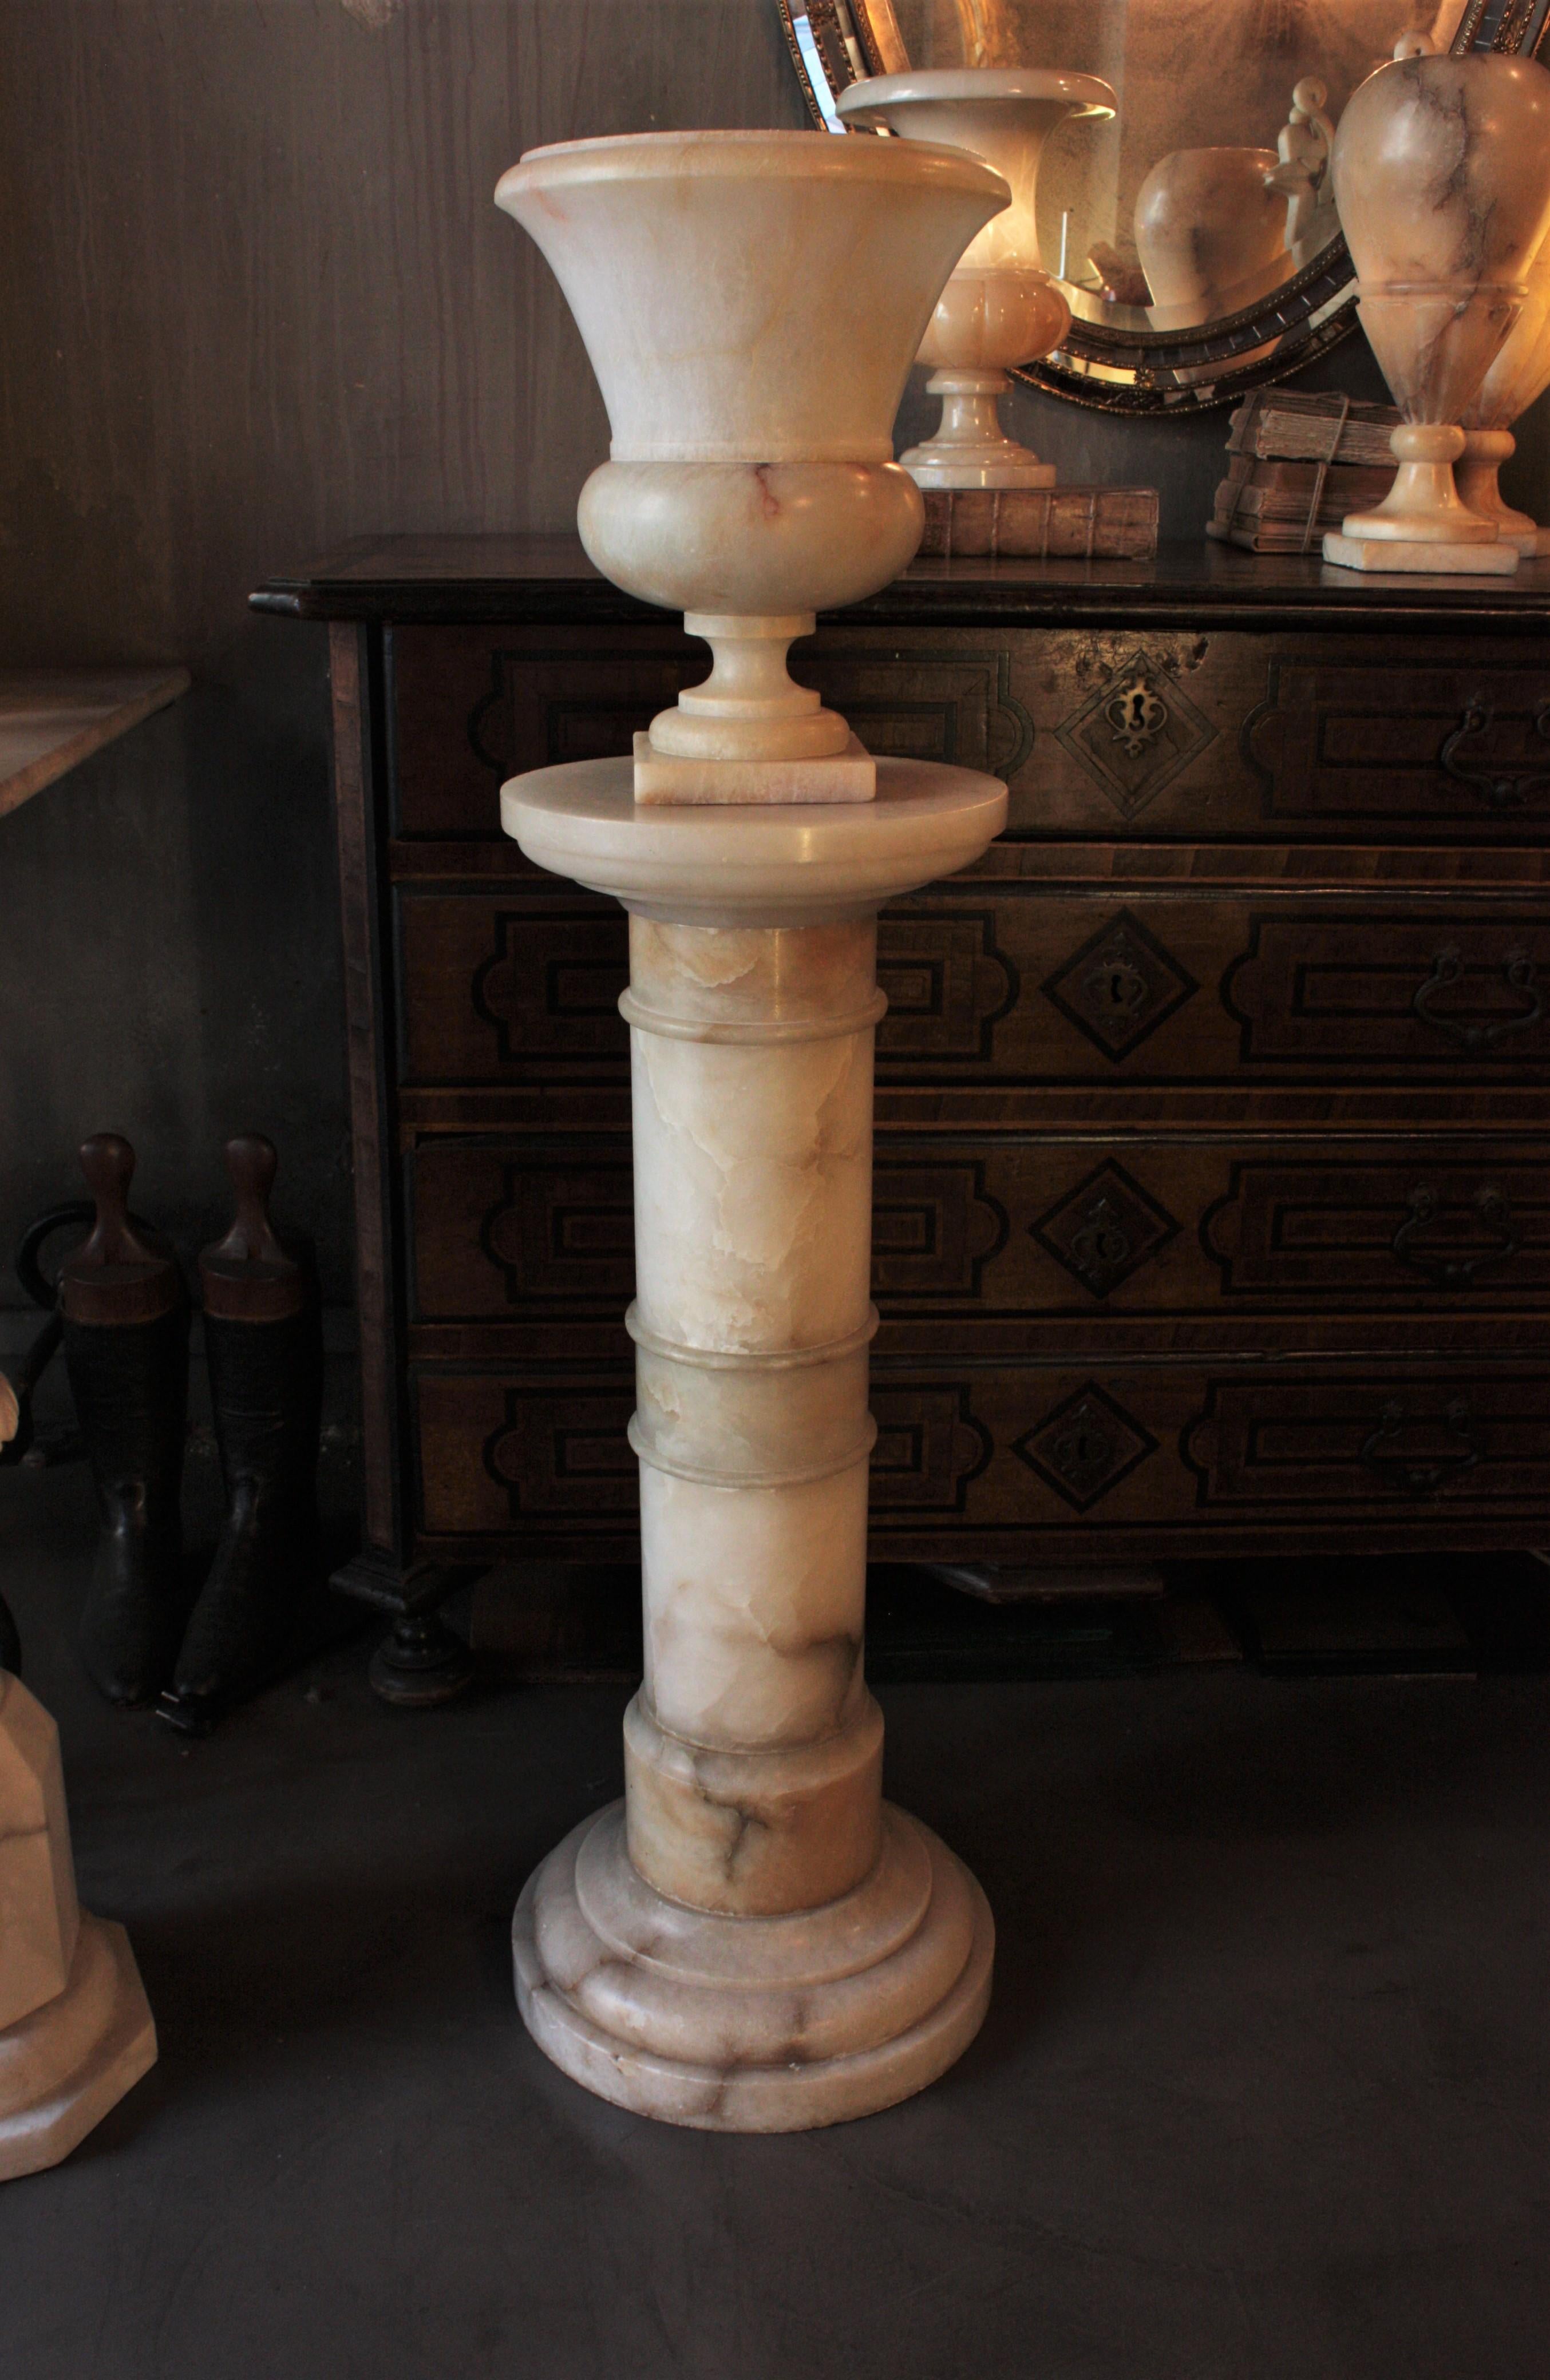 Neoclassical Alabaster Urn Lamp on Pedestal Stand

Gorgeous alabaster pedestal-mounted uplighter neoclassical urn lamp. Italy, 1940s.
Amazing aged patina, it provides a charming light and it has an stunning appearance when lit.
The pedestal and the